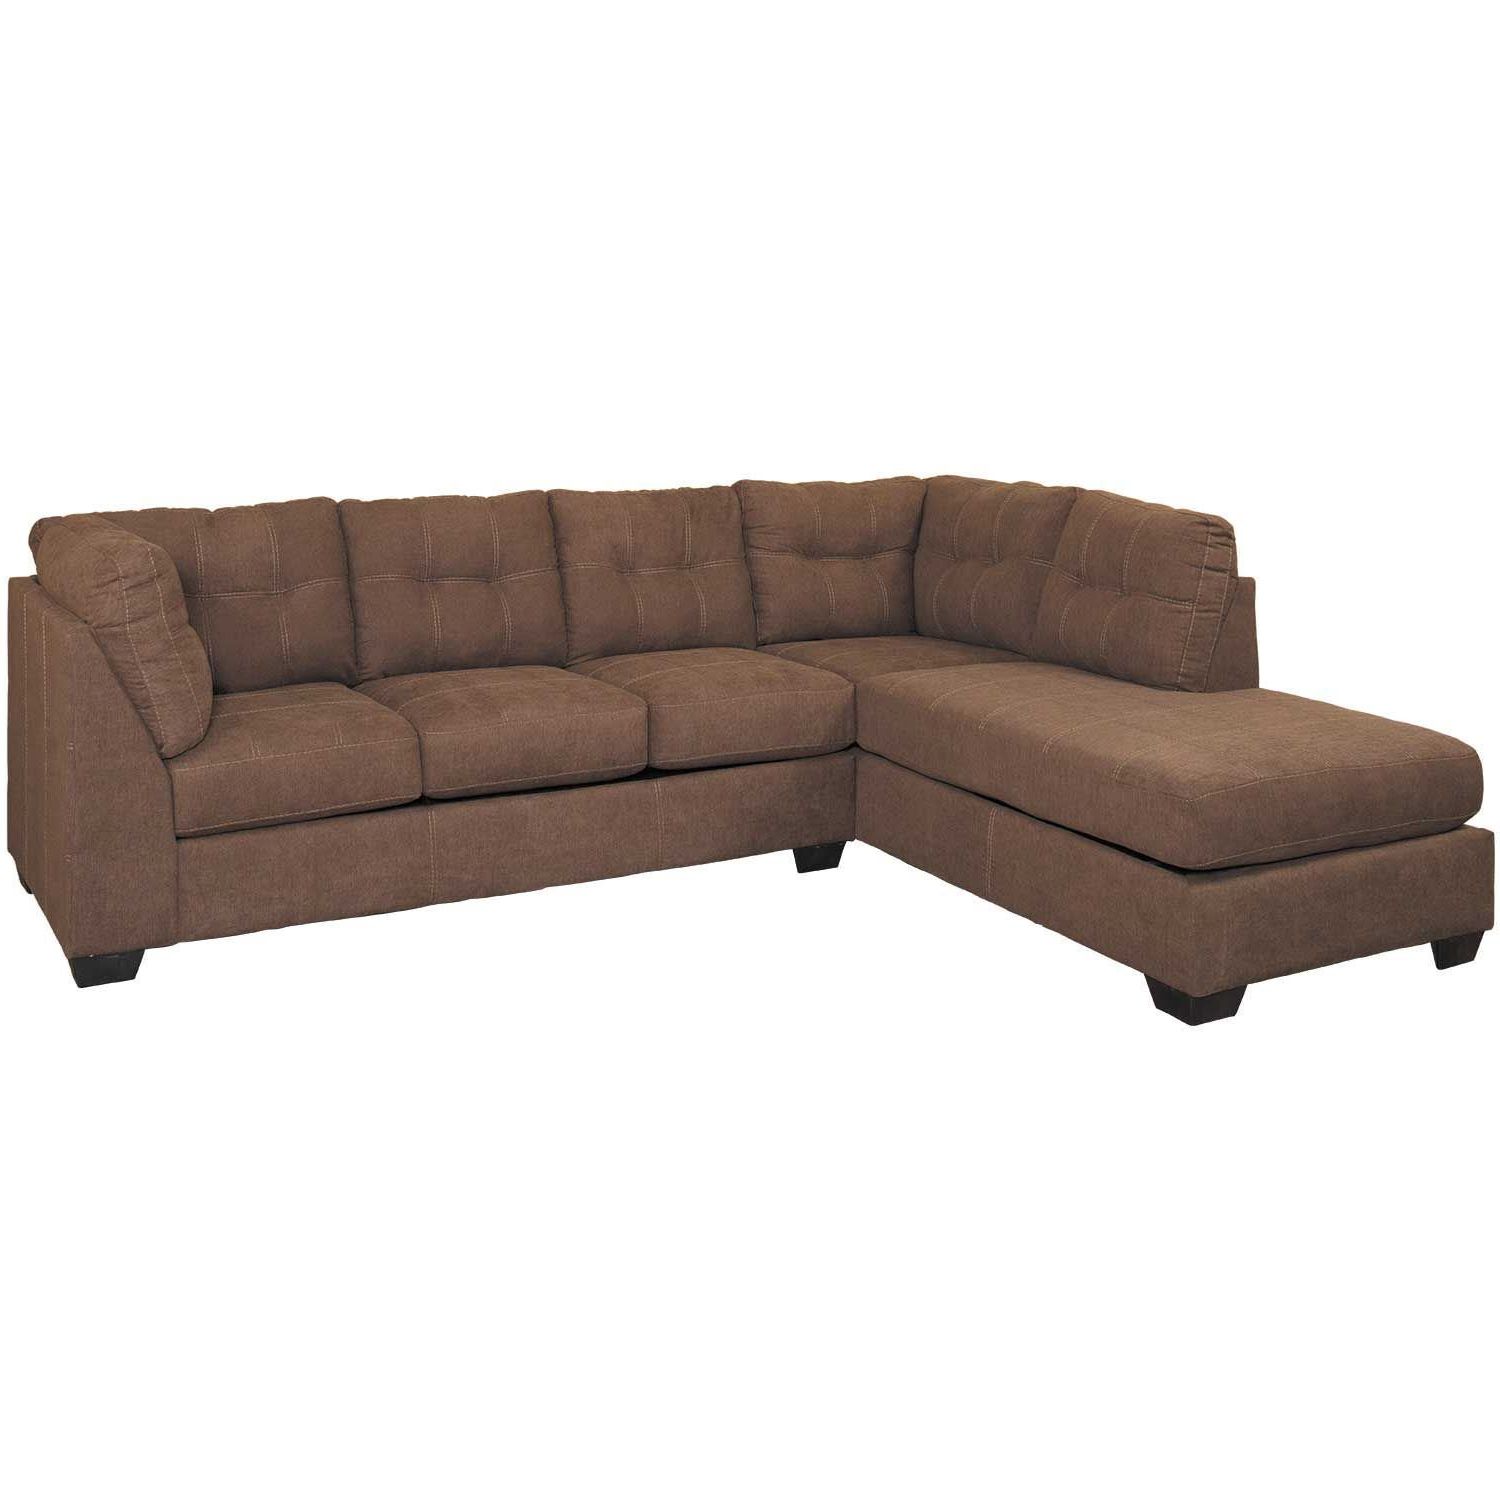 2018 Laf Chaise Sectional Sofa (View 20 of 20)